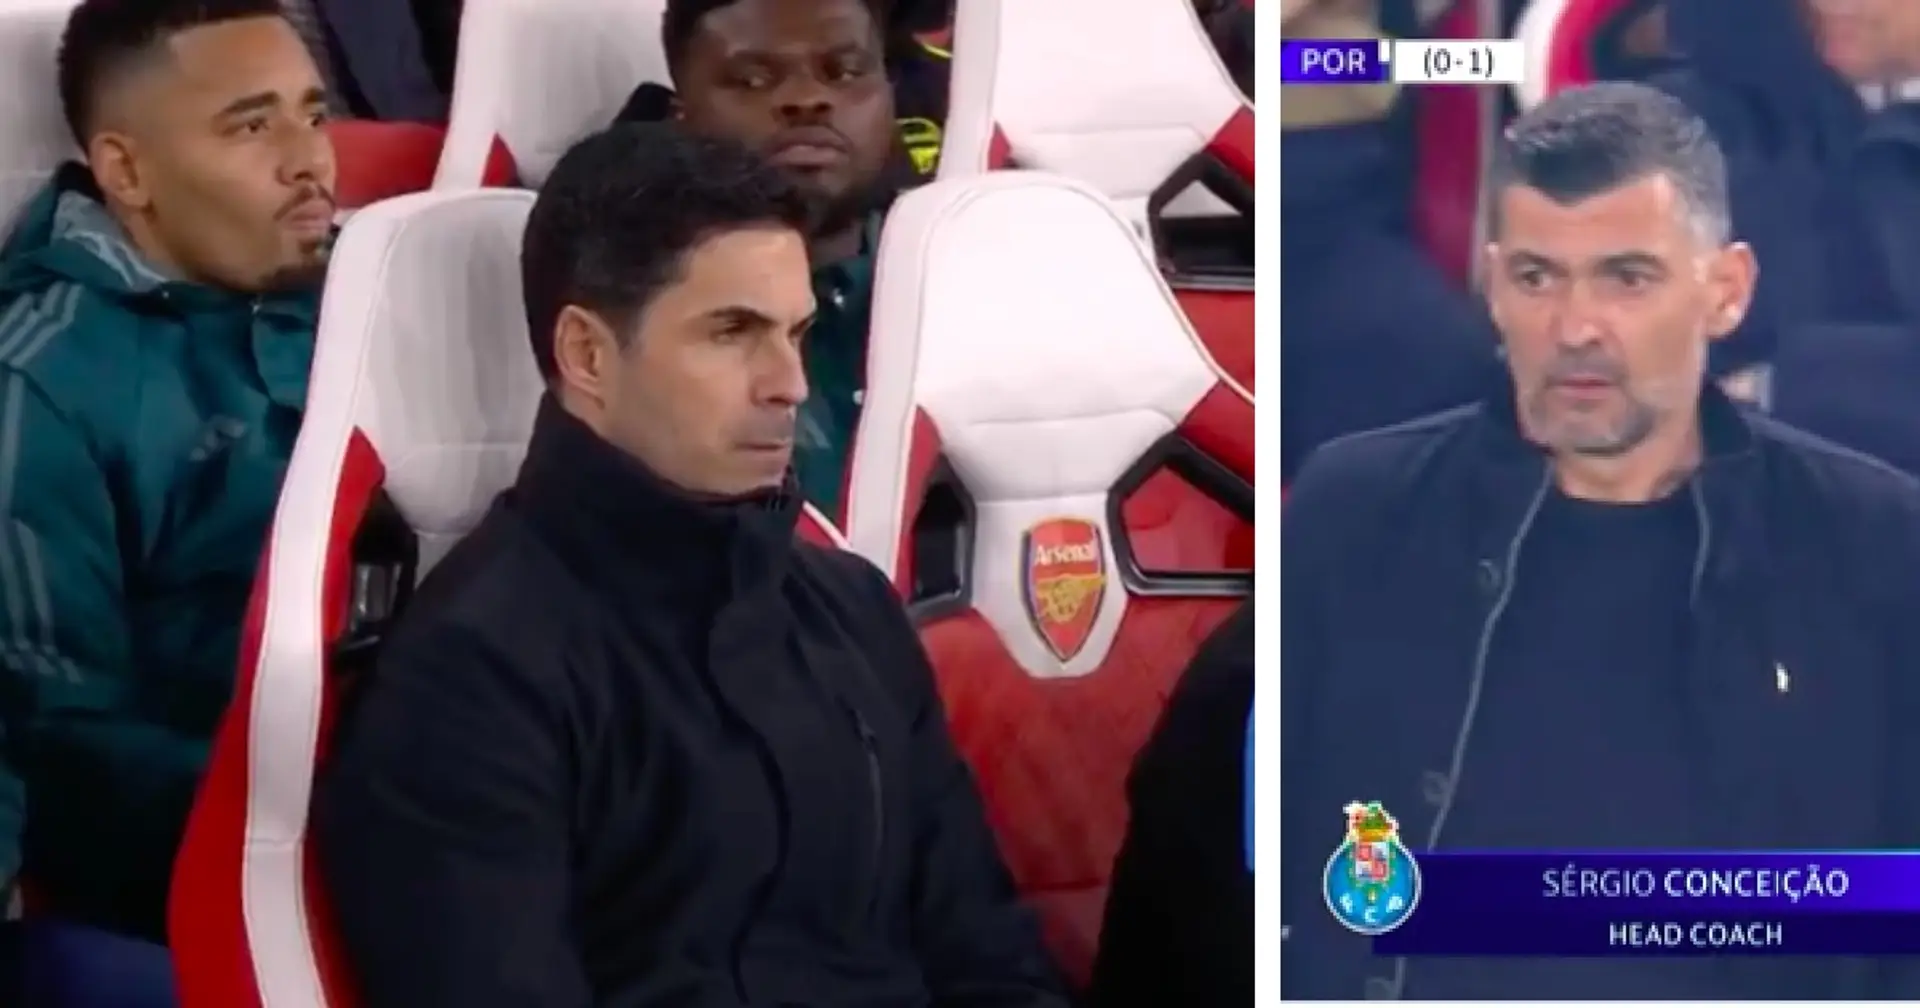 'This is his competition': Arsenal fans want ONE substitute player introduced early v Porto